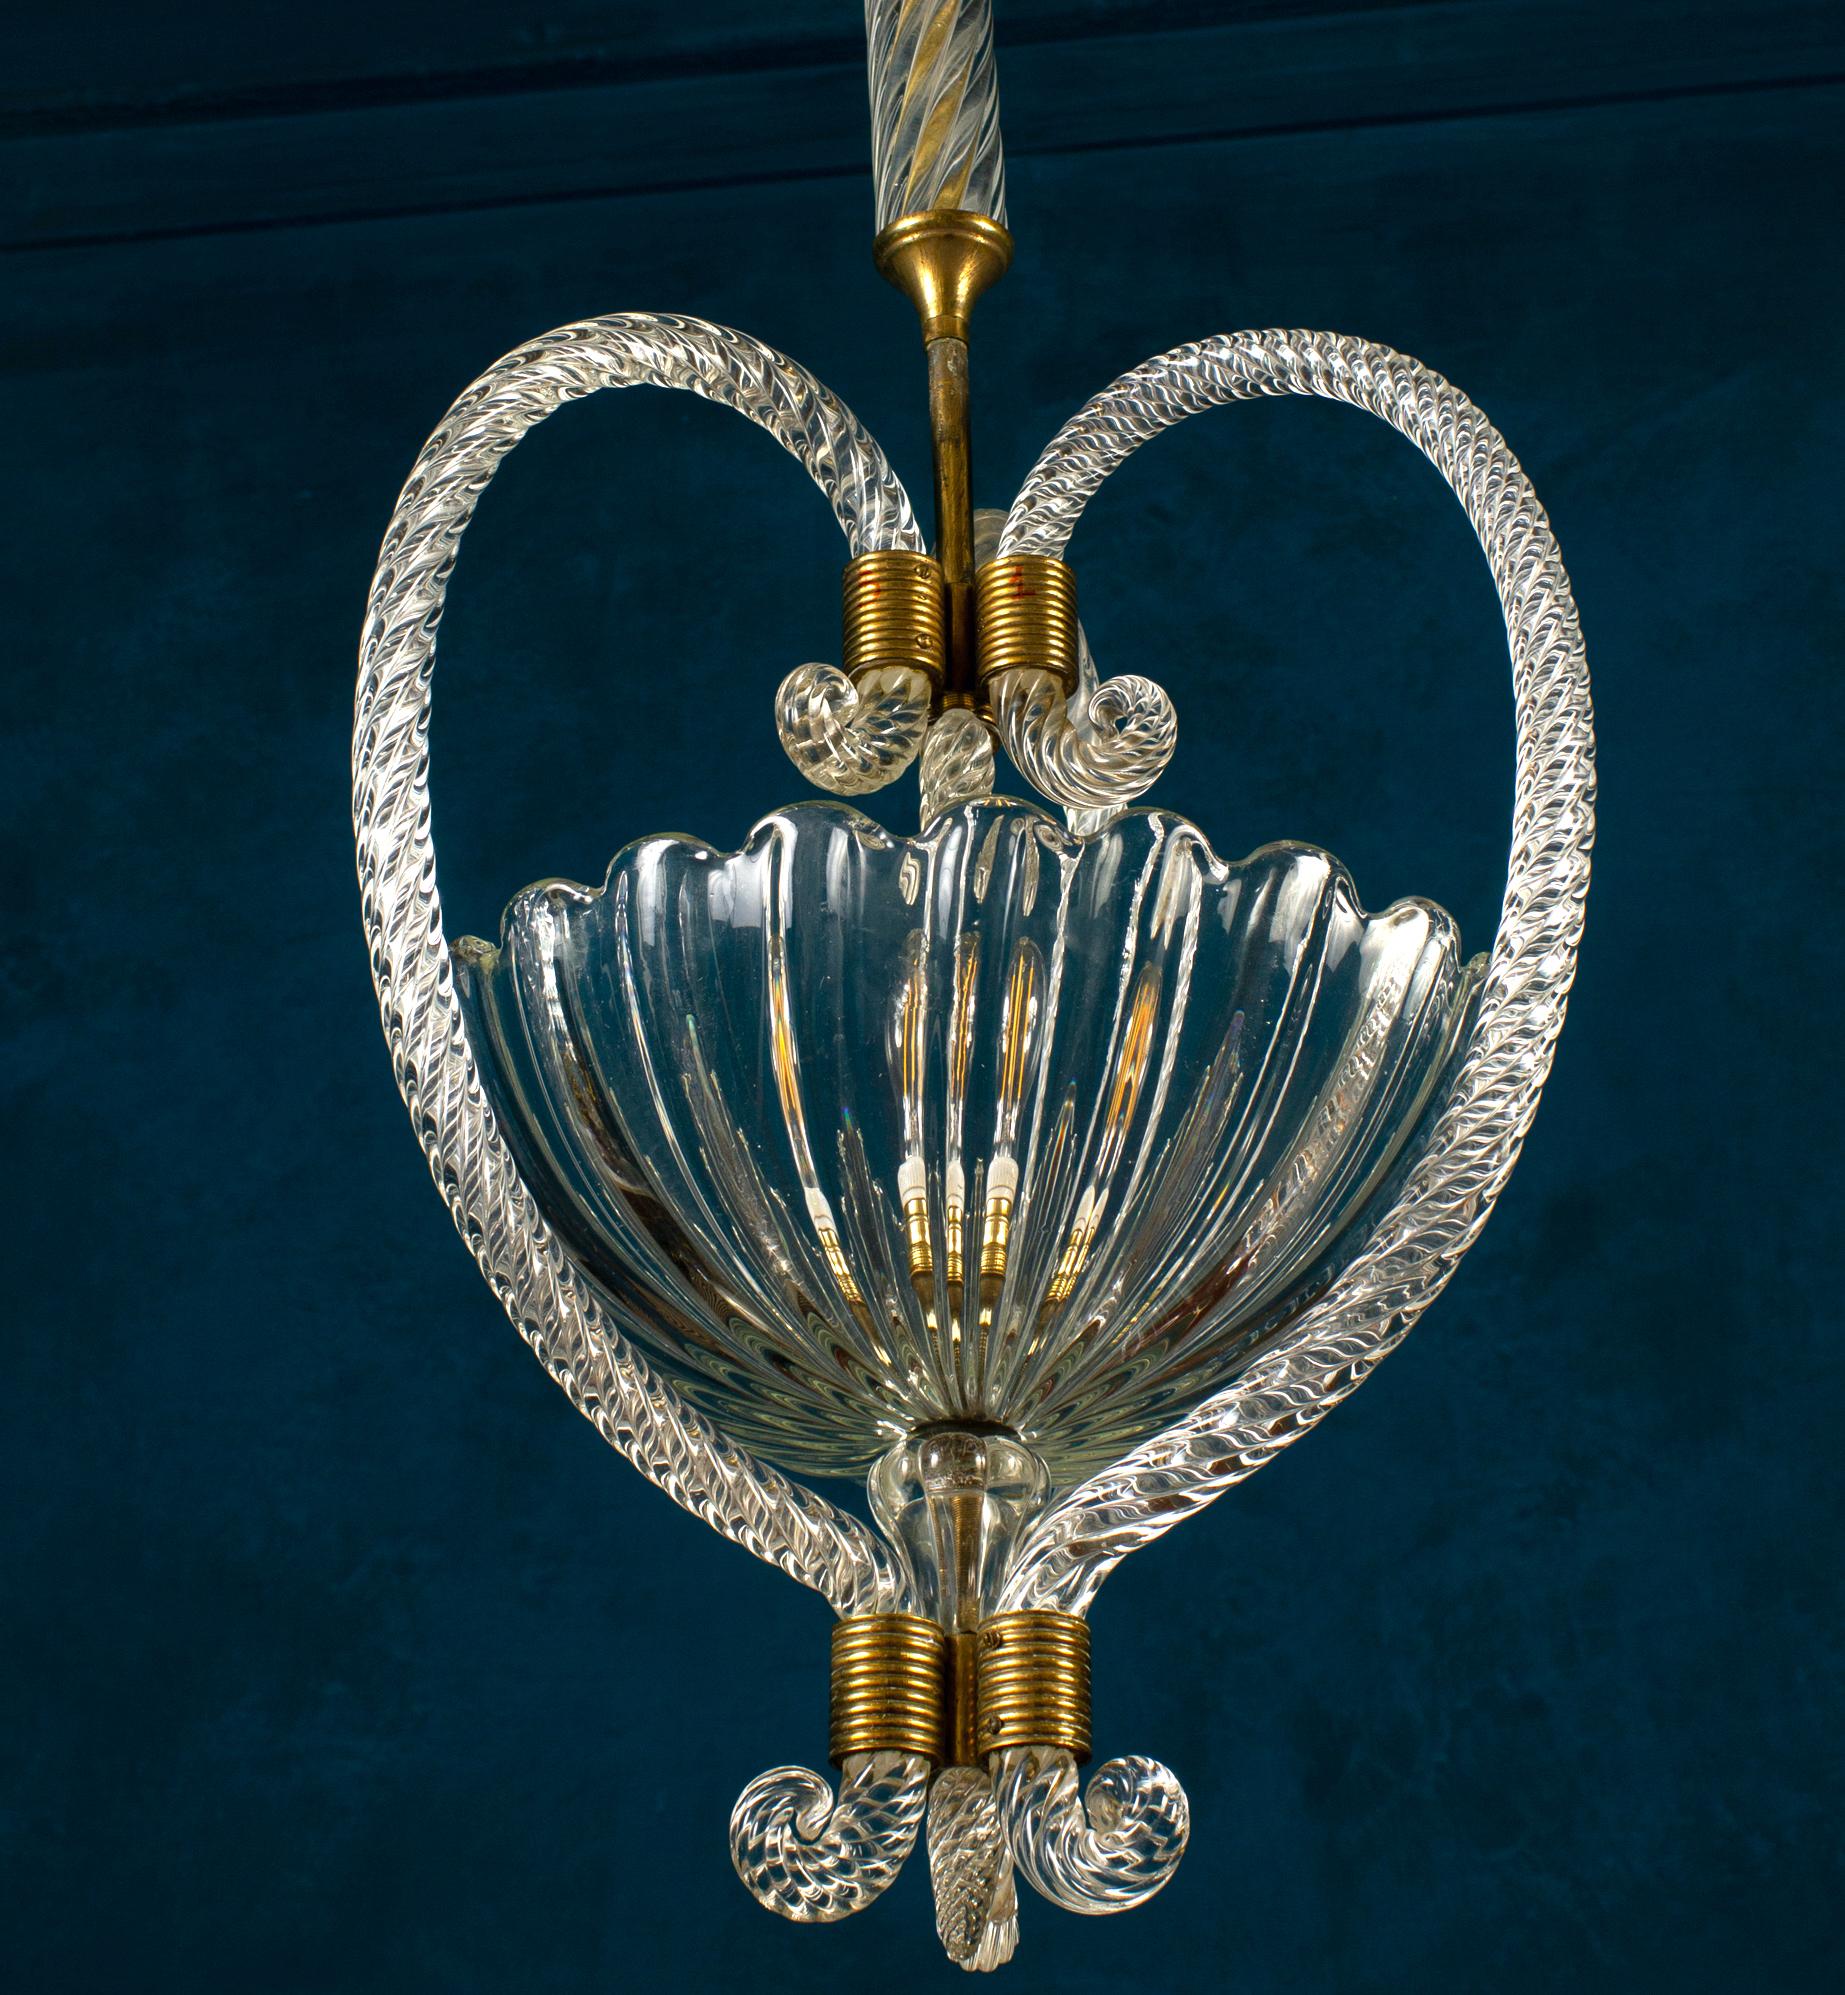 Mid-20th Century Exceptional Art Deco Chandelier or Lanterns by Ercole Barovier, 1940